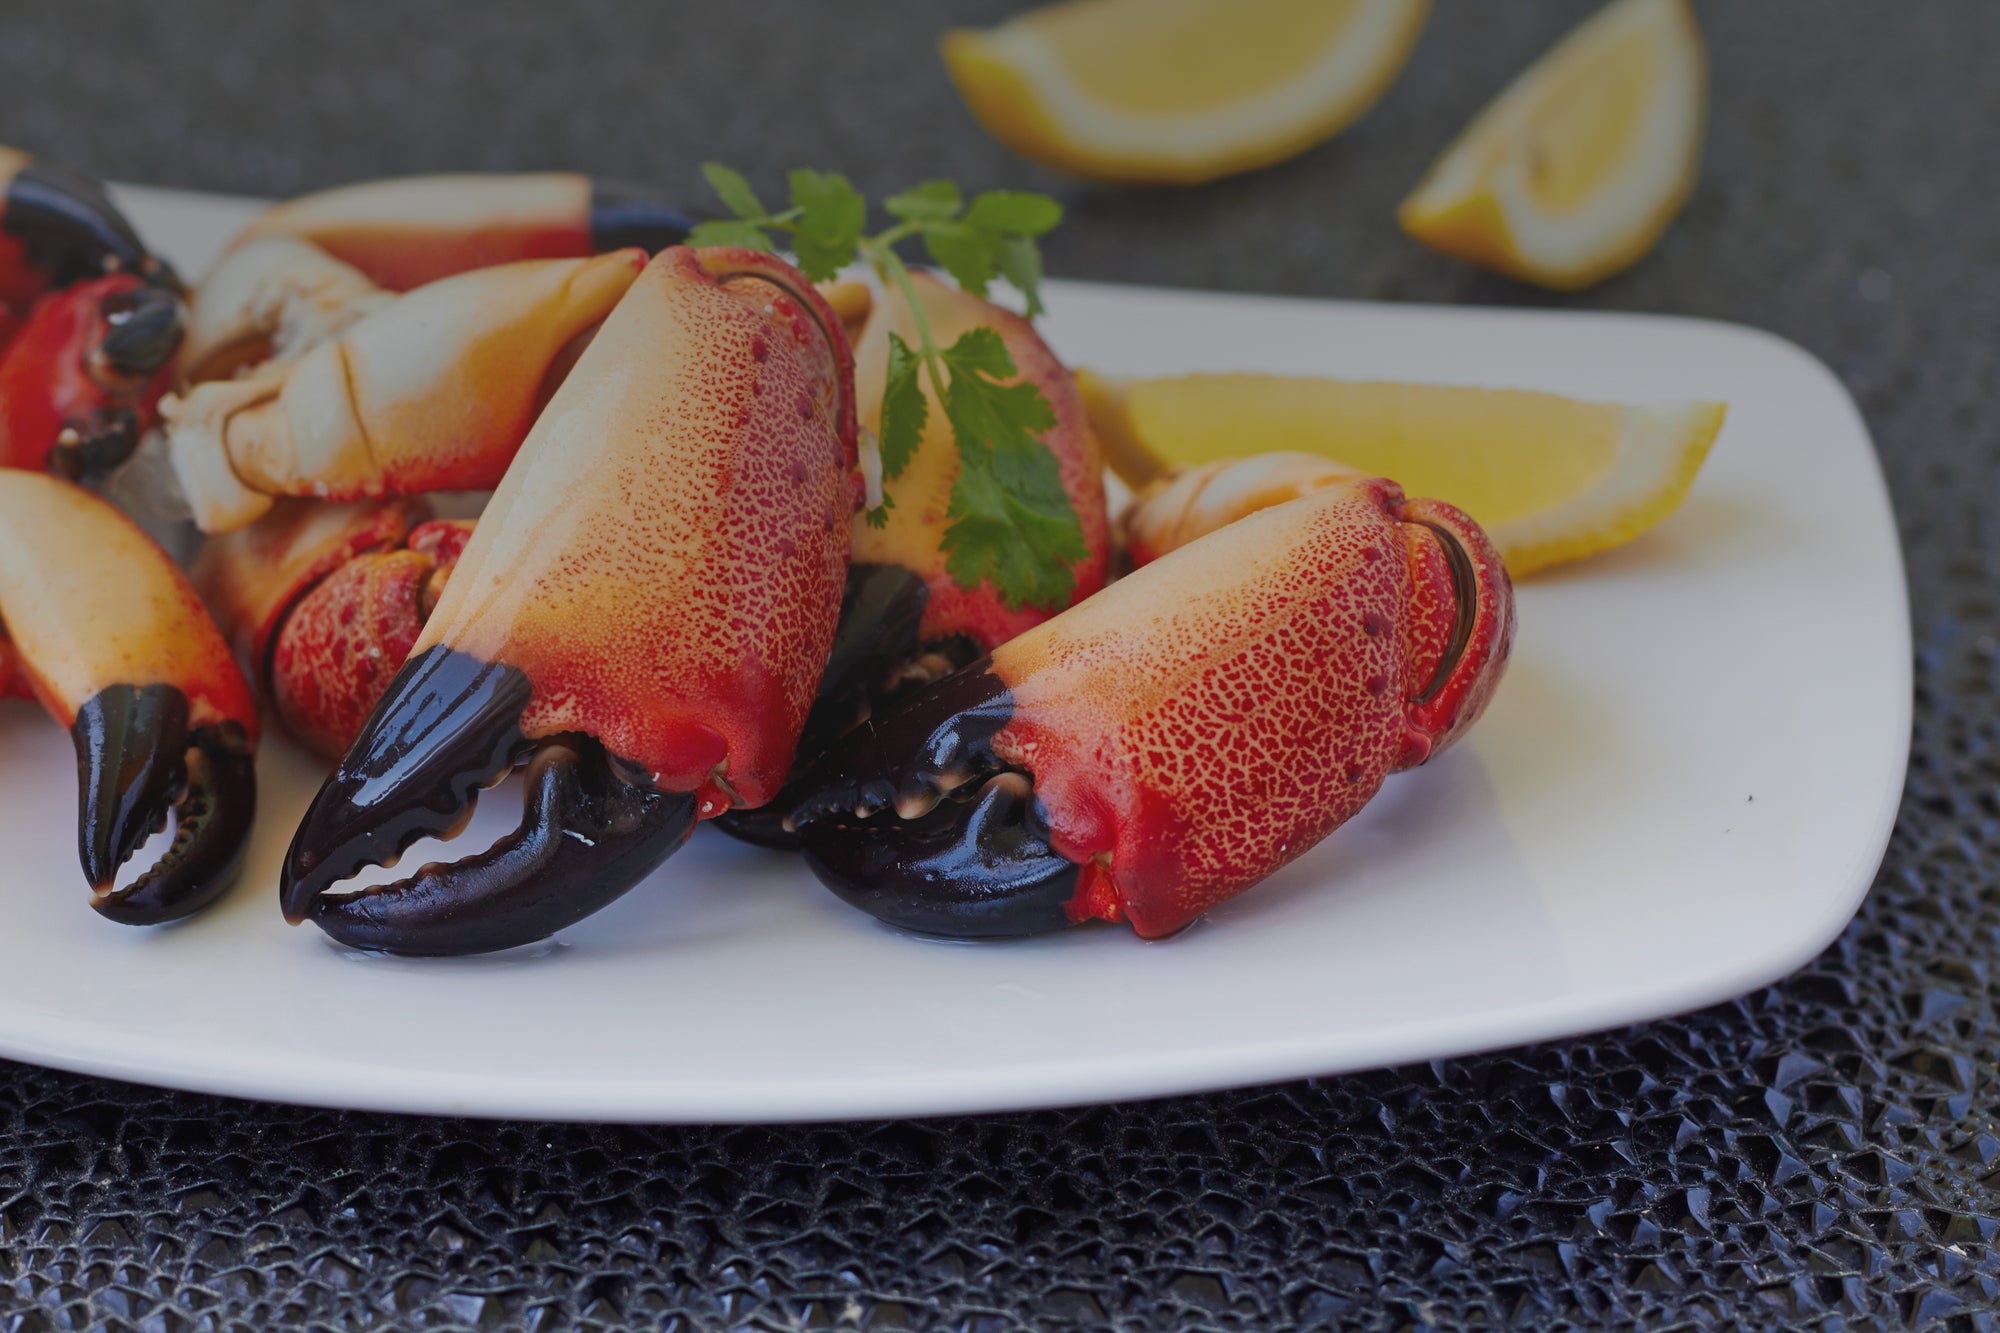 How can you tell if your Florida stone crabs are fresh? Buy from Patas fresh stone crabs delivered to your door anywhere in the US and select international locations